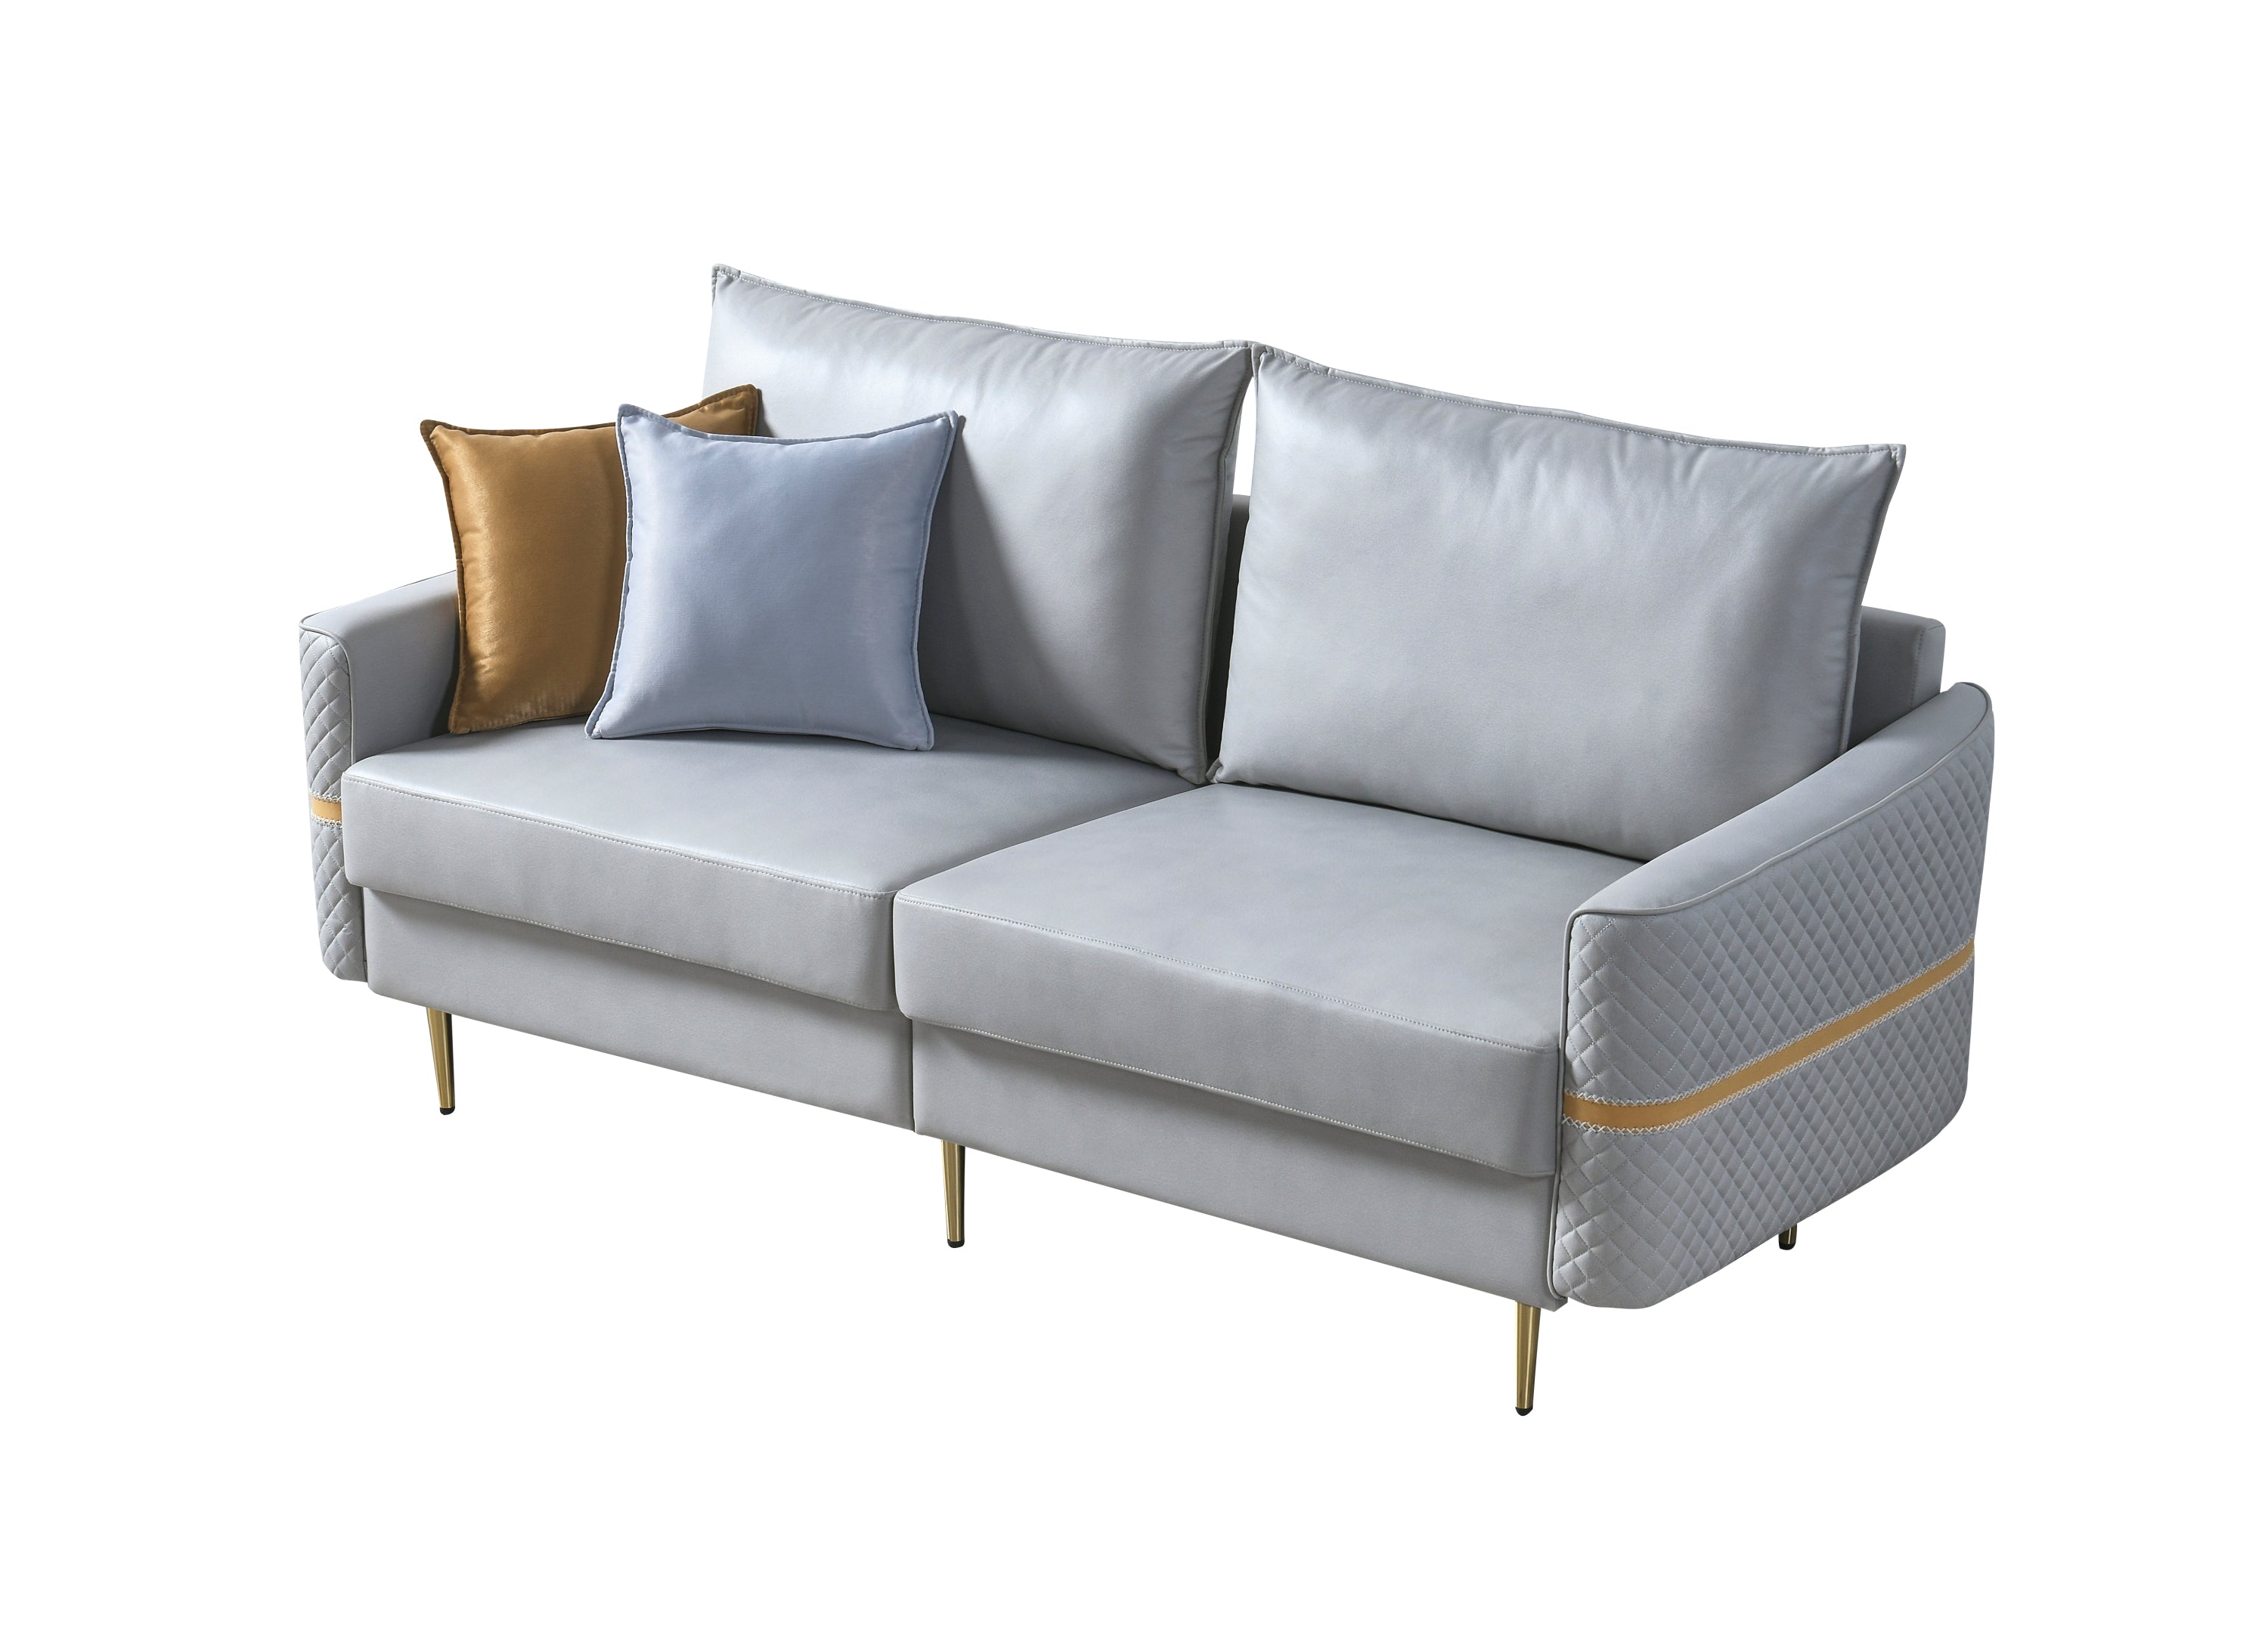 72" Loveseat Sofa with 2 Pillows (Gray)